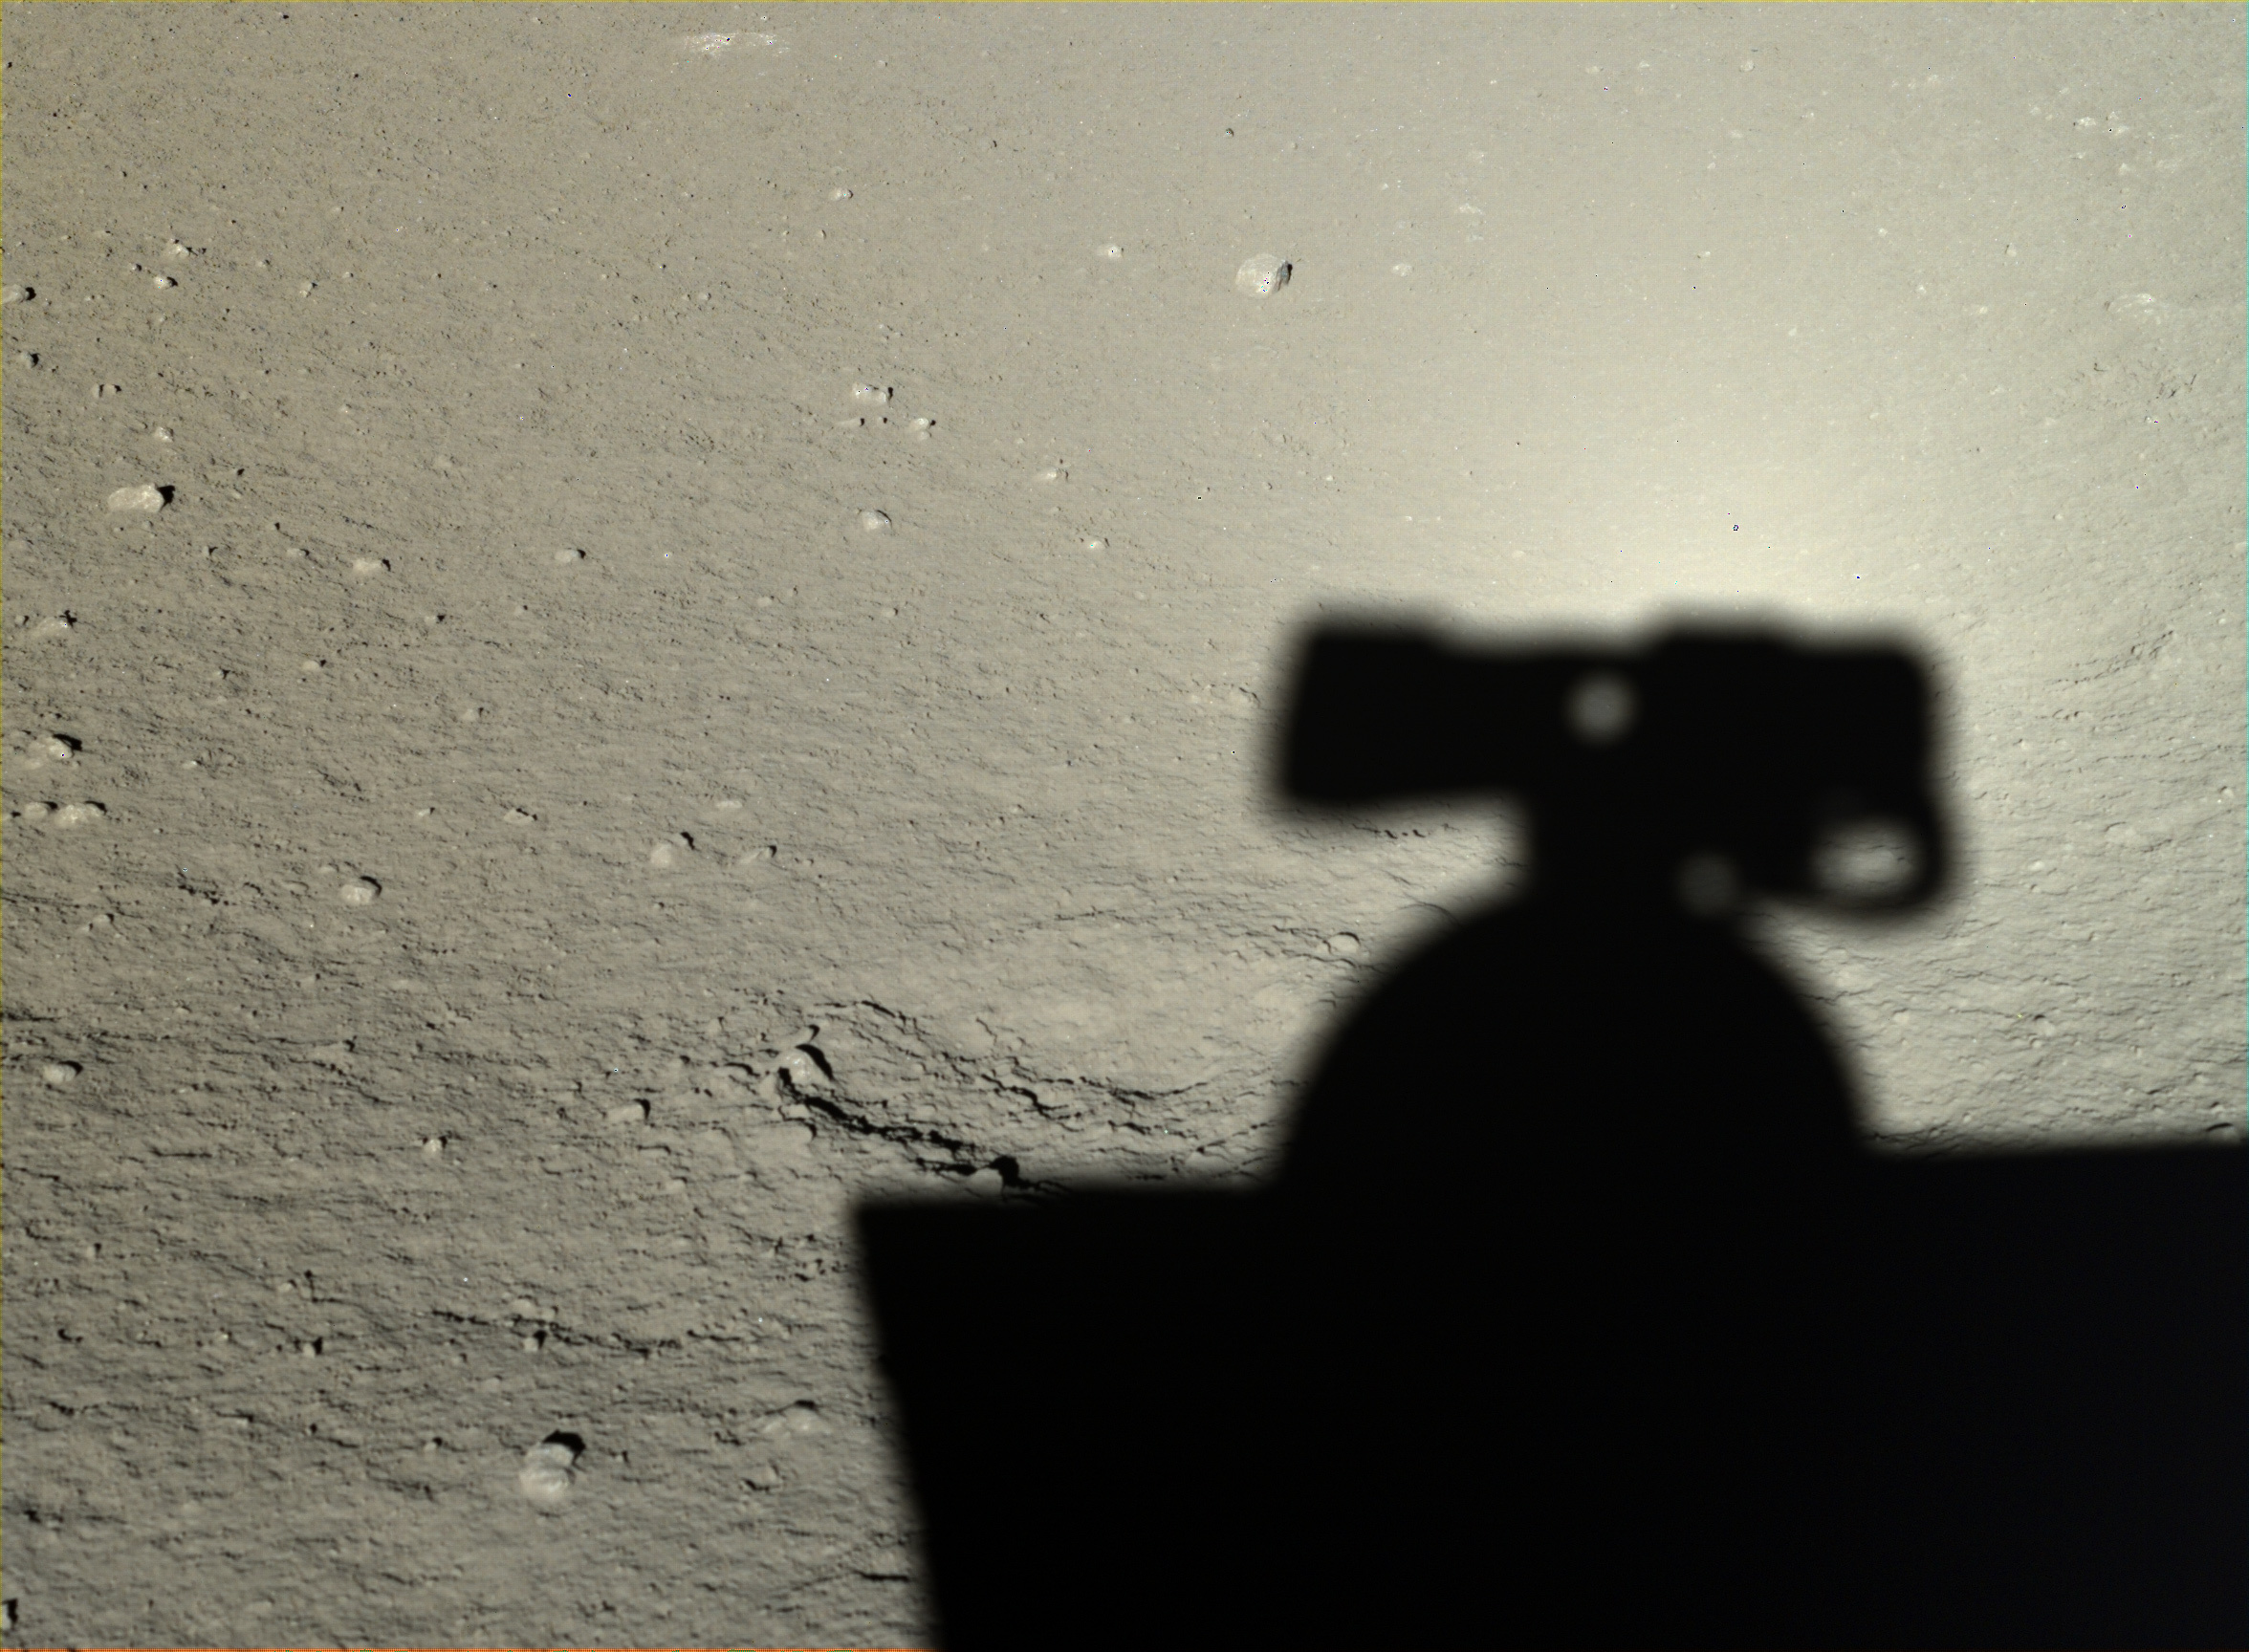 Yutu took this photo of its own shadow on Jan. 12, 2014.